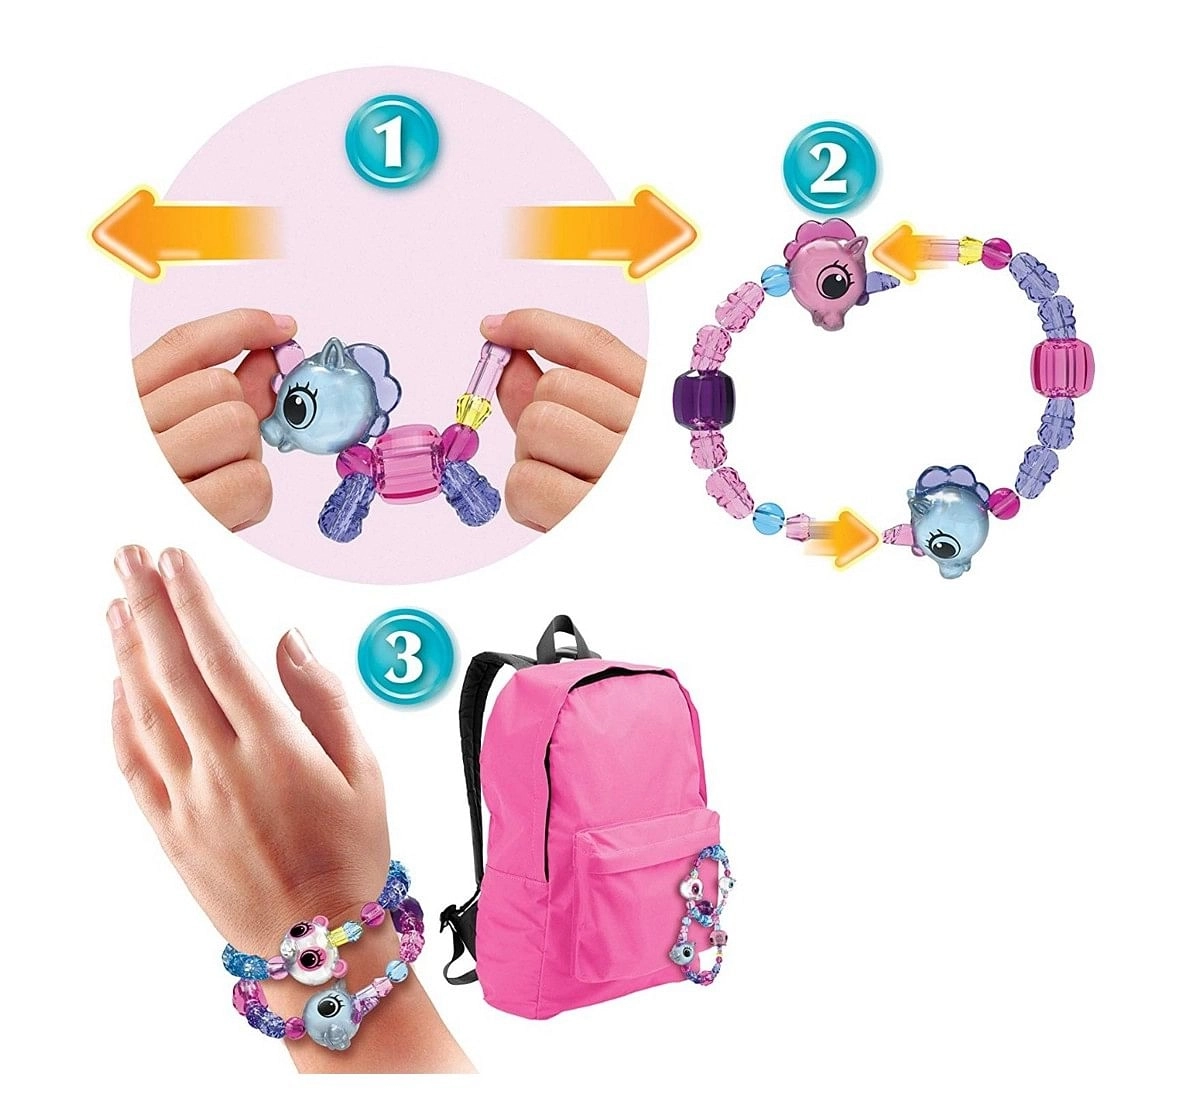 Twisty Petz Twin Four Pack - Collectible Bracelet & Case For Kids Novelty for age 3Y+ 